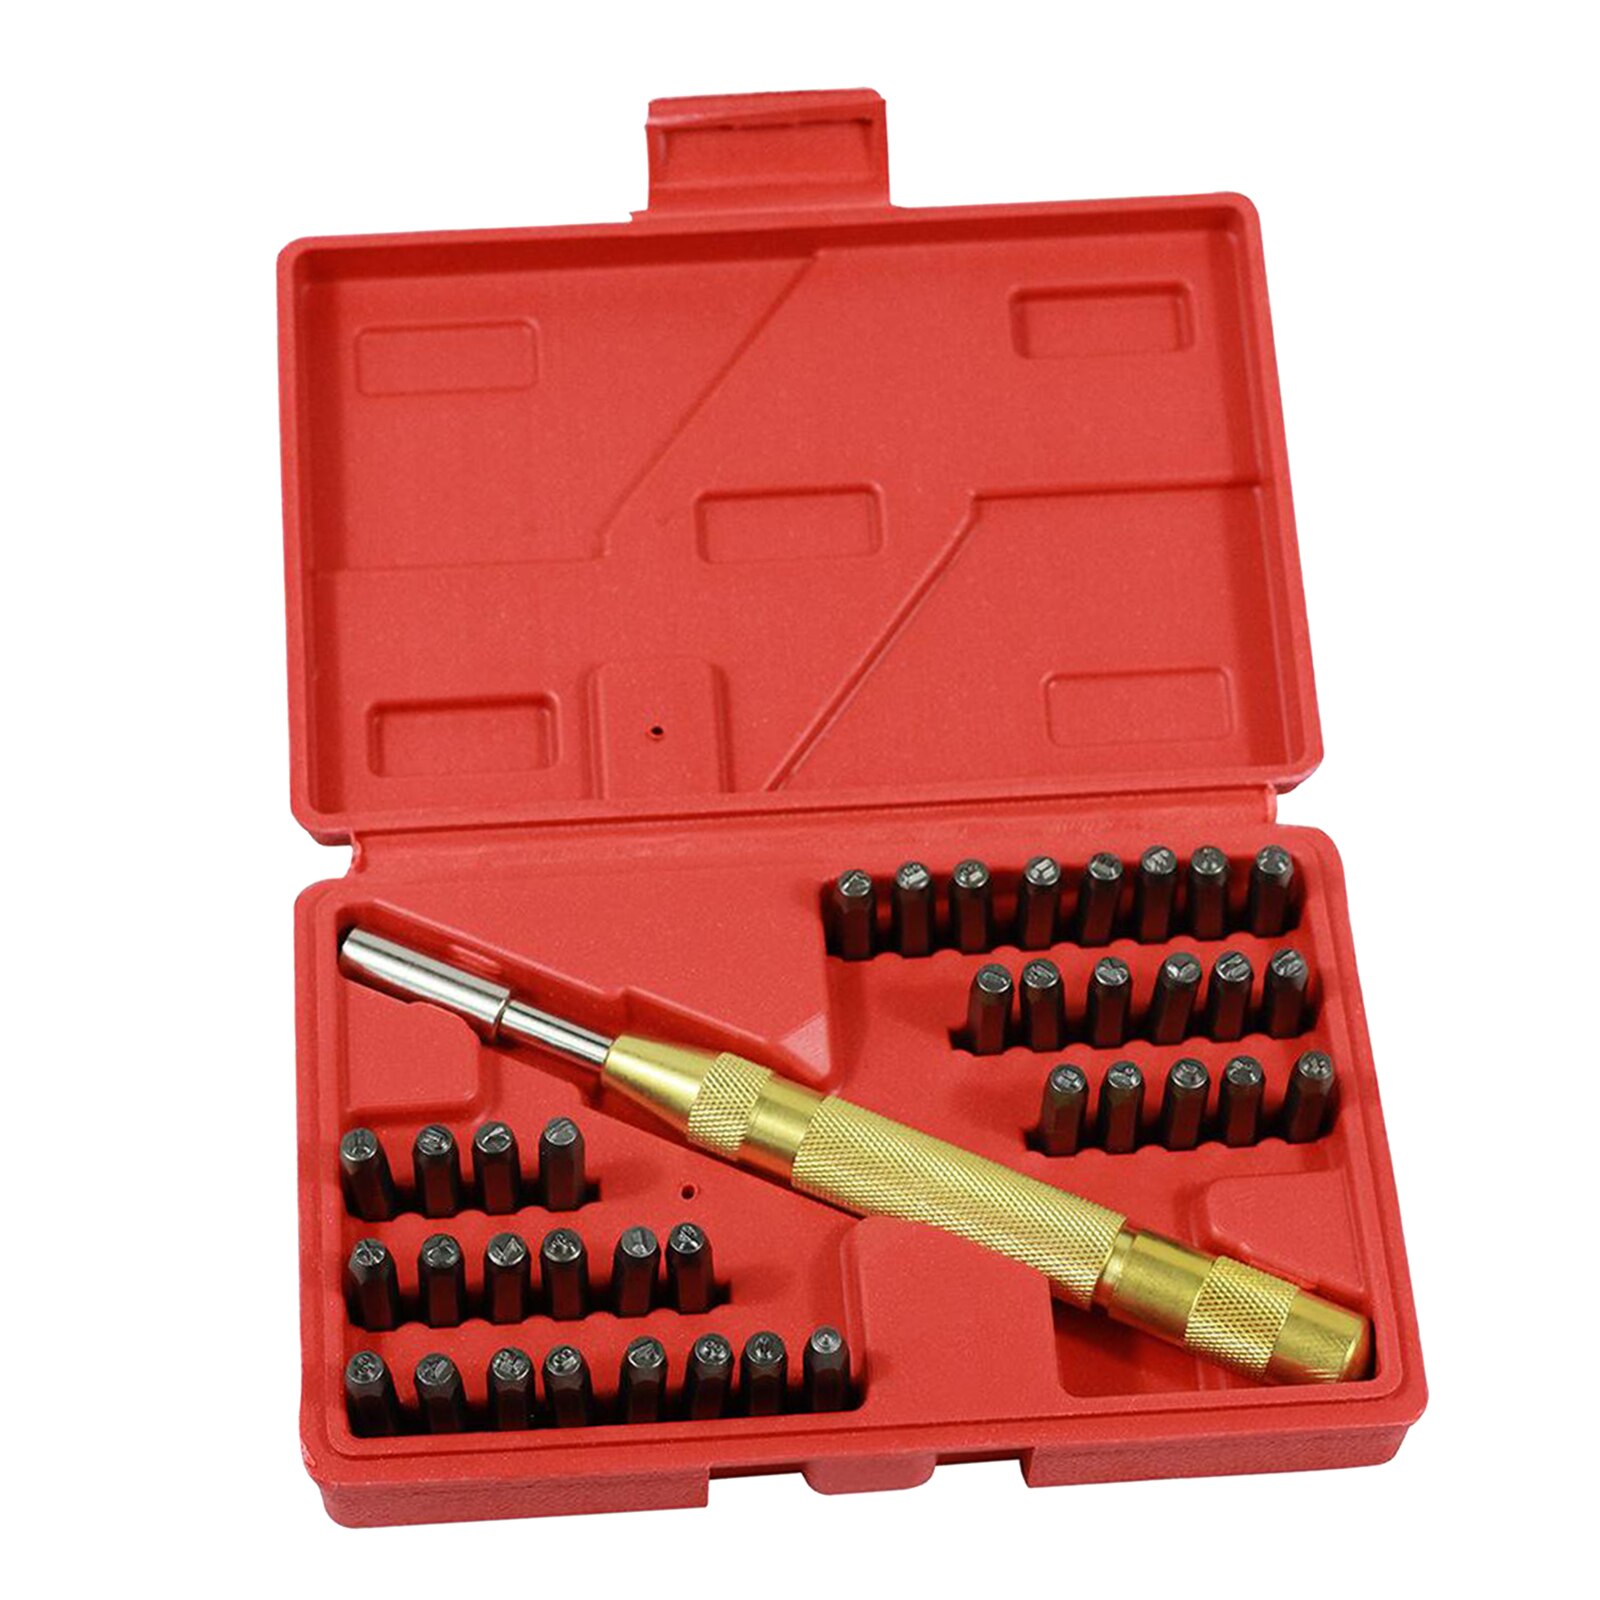 38x Multi-purpose Alloy Steel Letter and Number Stamp Automatic Letter Number Stamping Metal Punch Stamp Set Tool